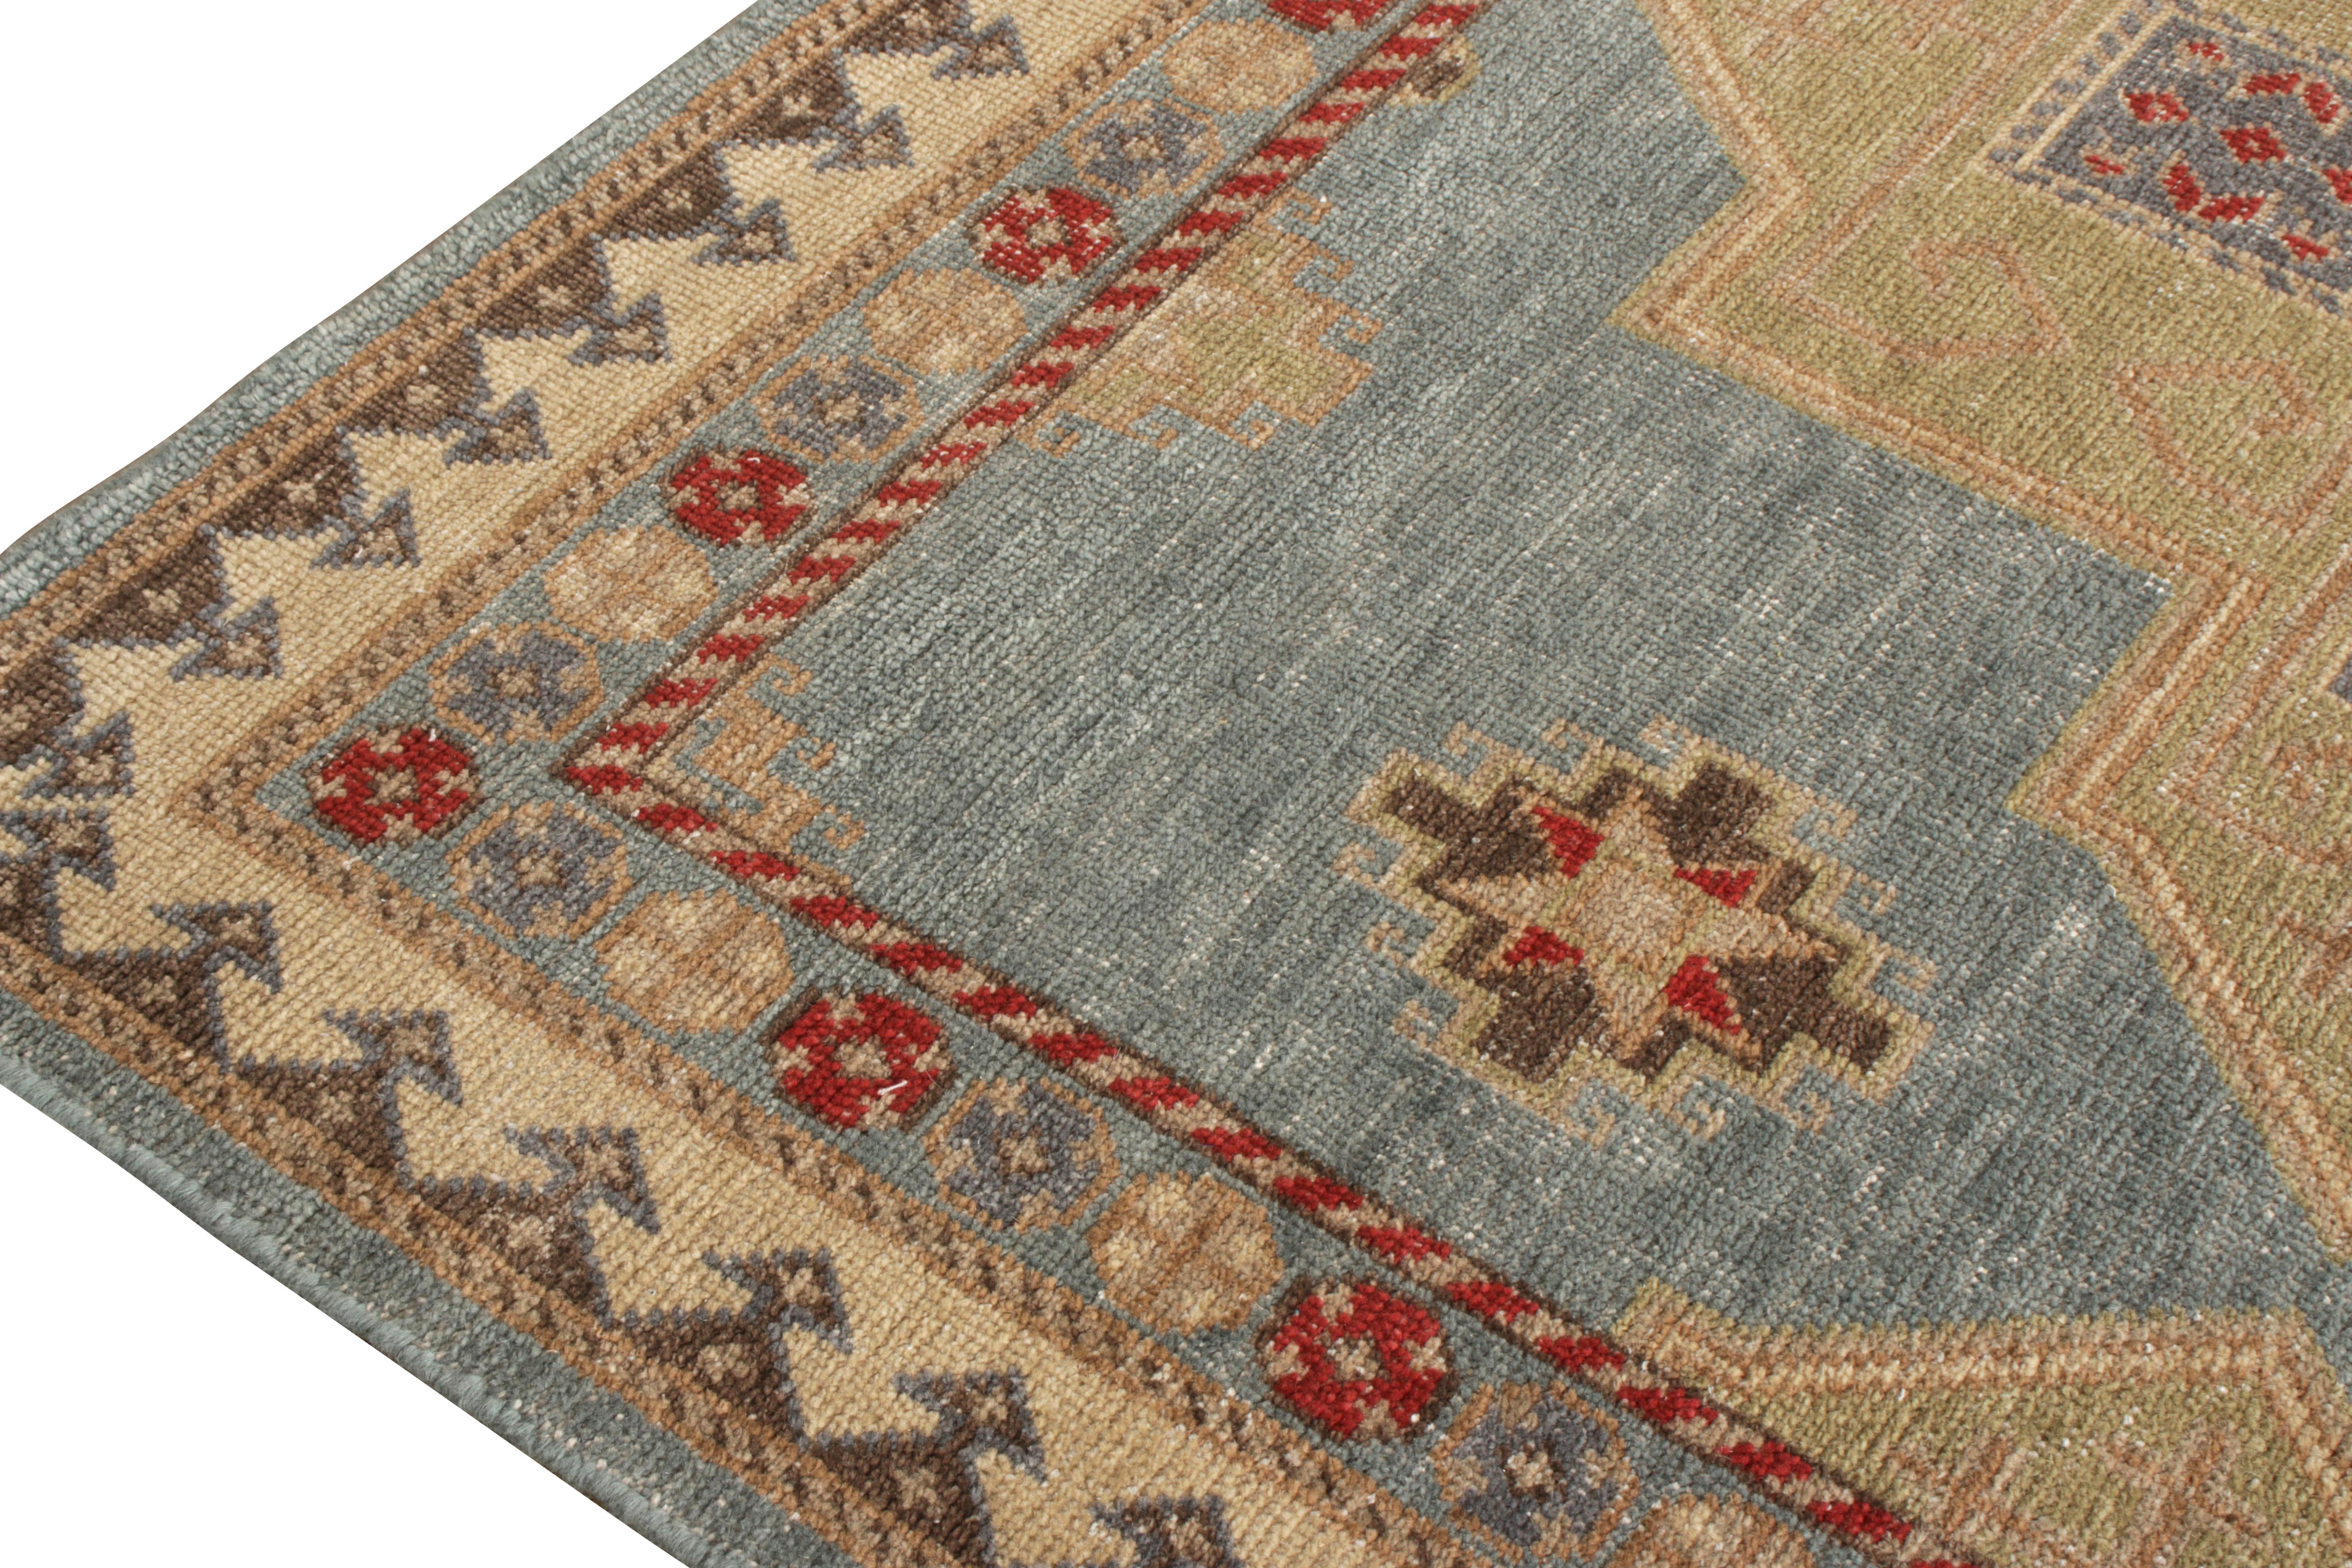 Indian Rug & Kilim’s Distressed Classic Style Rug in Blue, Beige-Green Geometric Patter For Sale